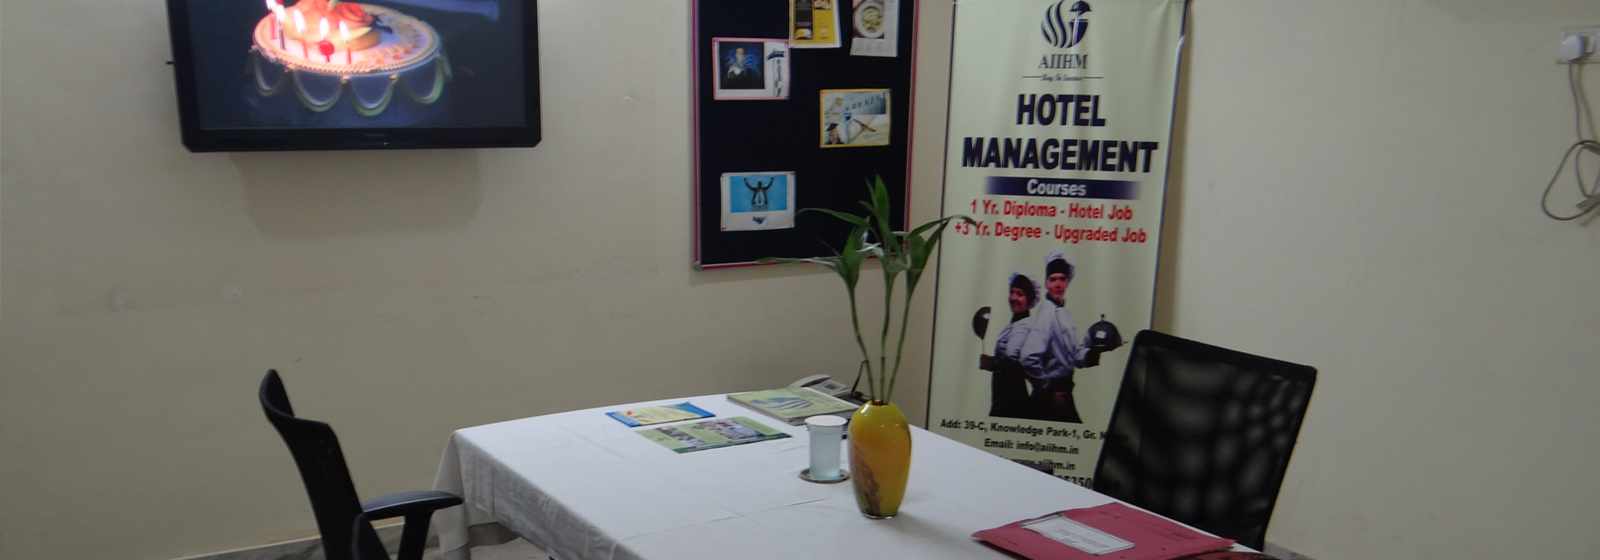 Top 10 hotel management colleges in India